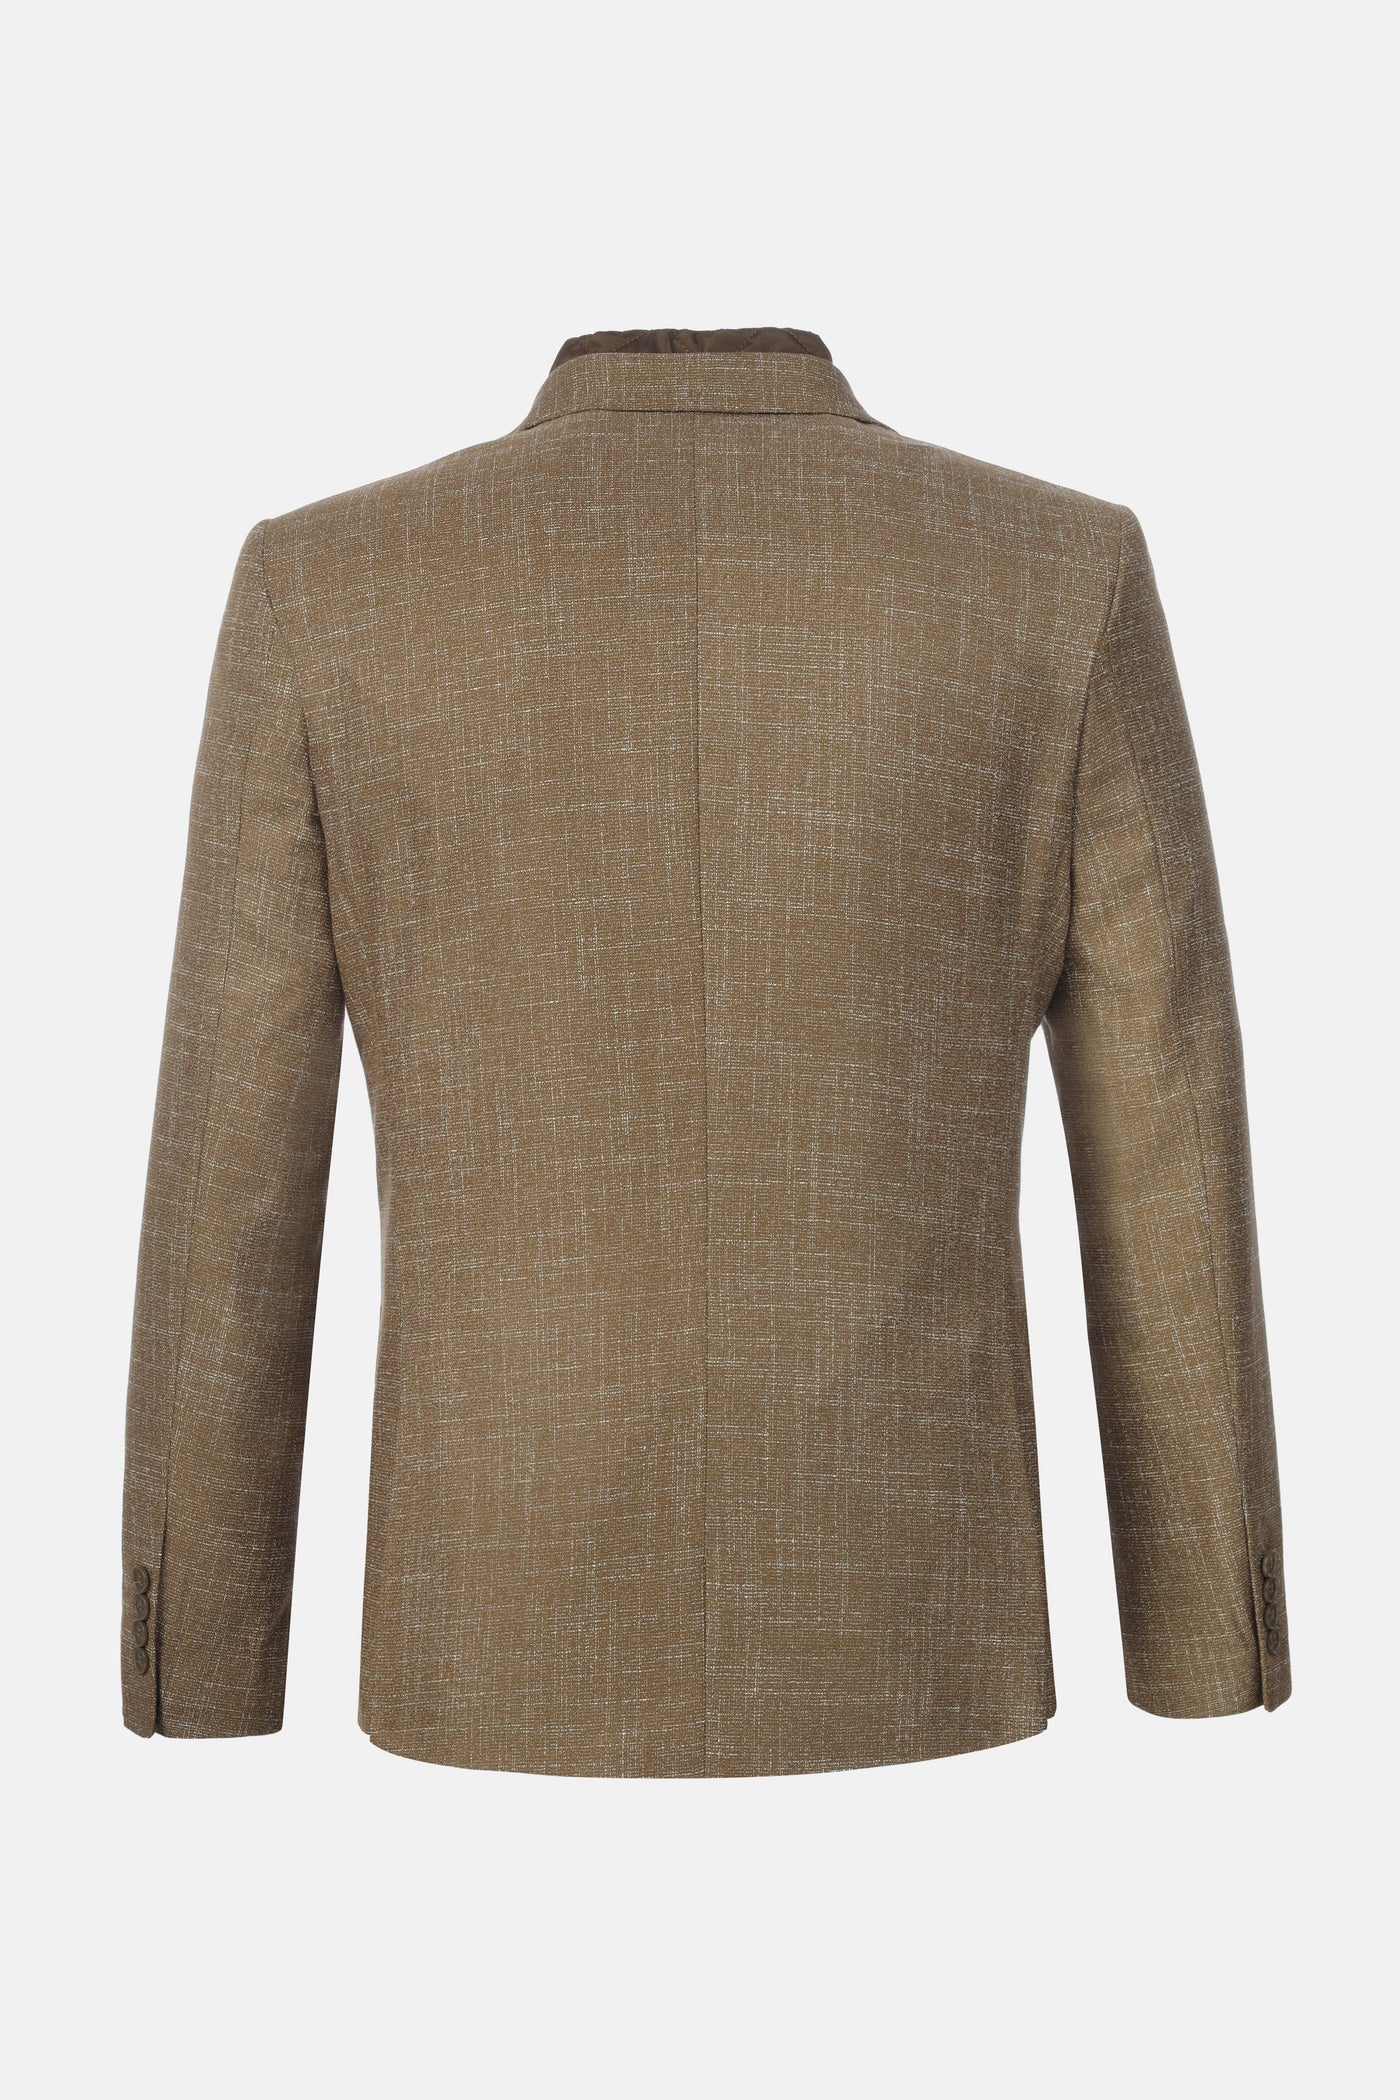 Woven Jaquard  Walnut Brwon & White Blazer with removable padded piece